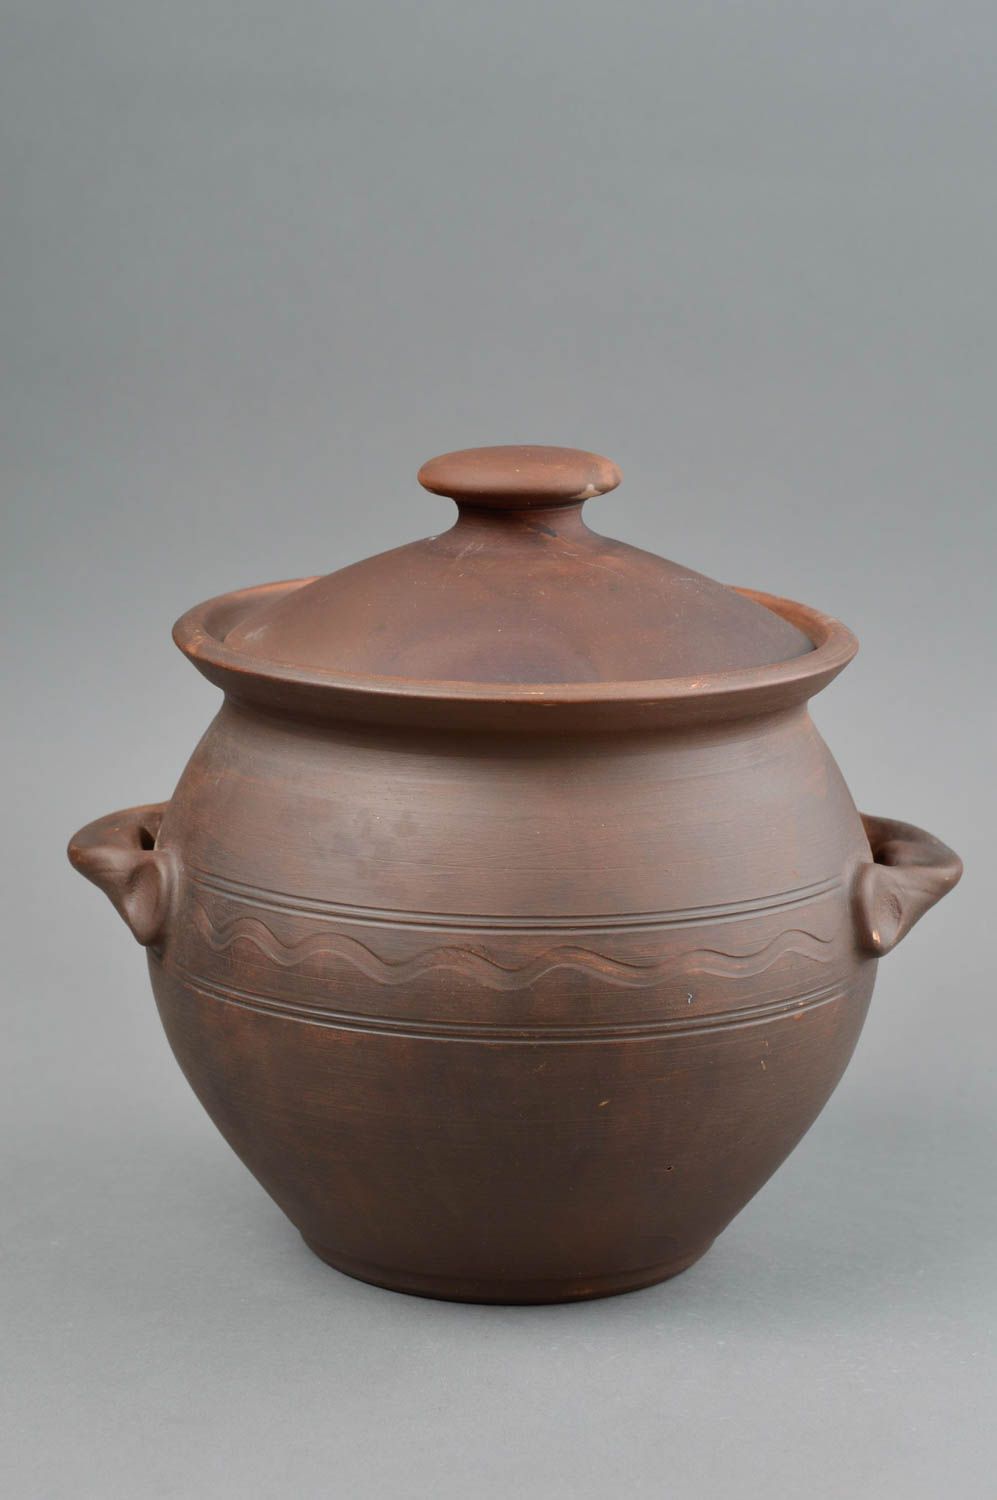 15 oz clay cooking pot for oven with lid 3,5 lb photo 2